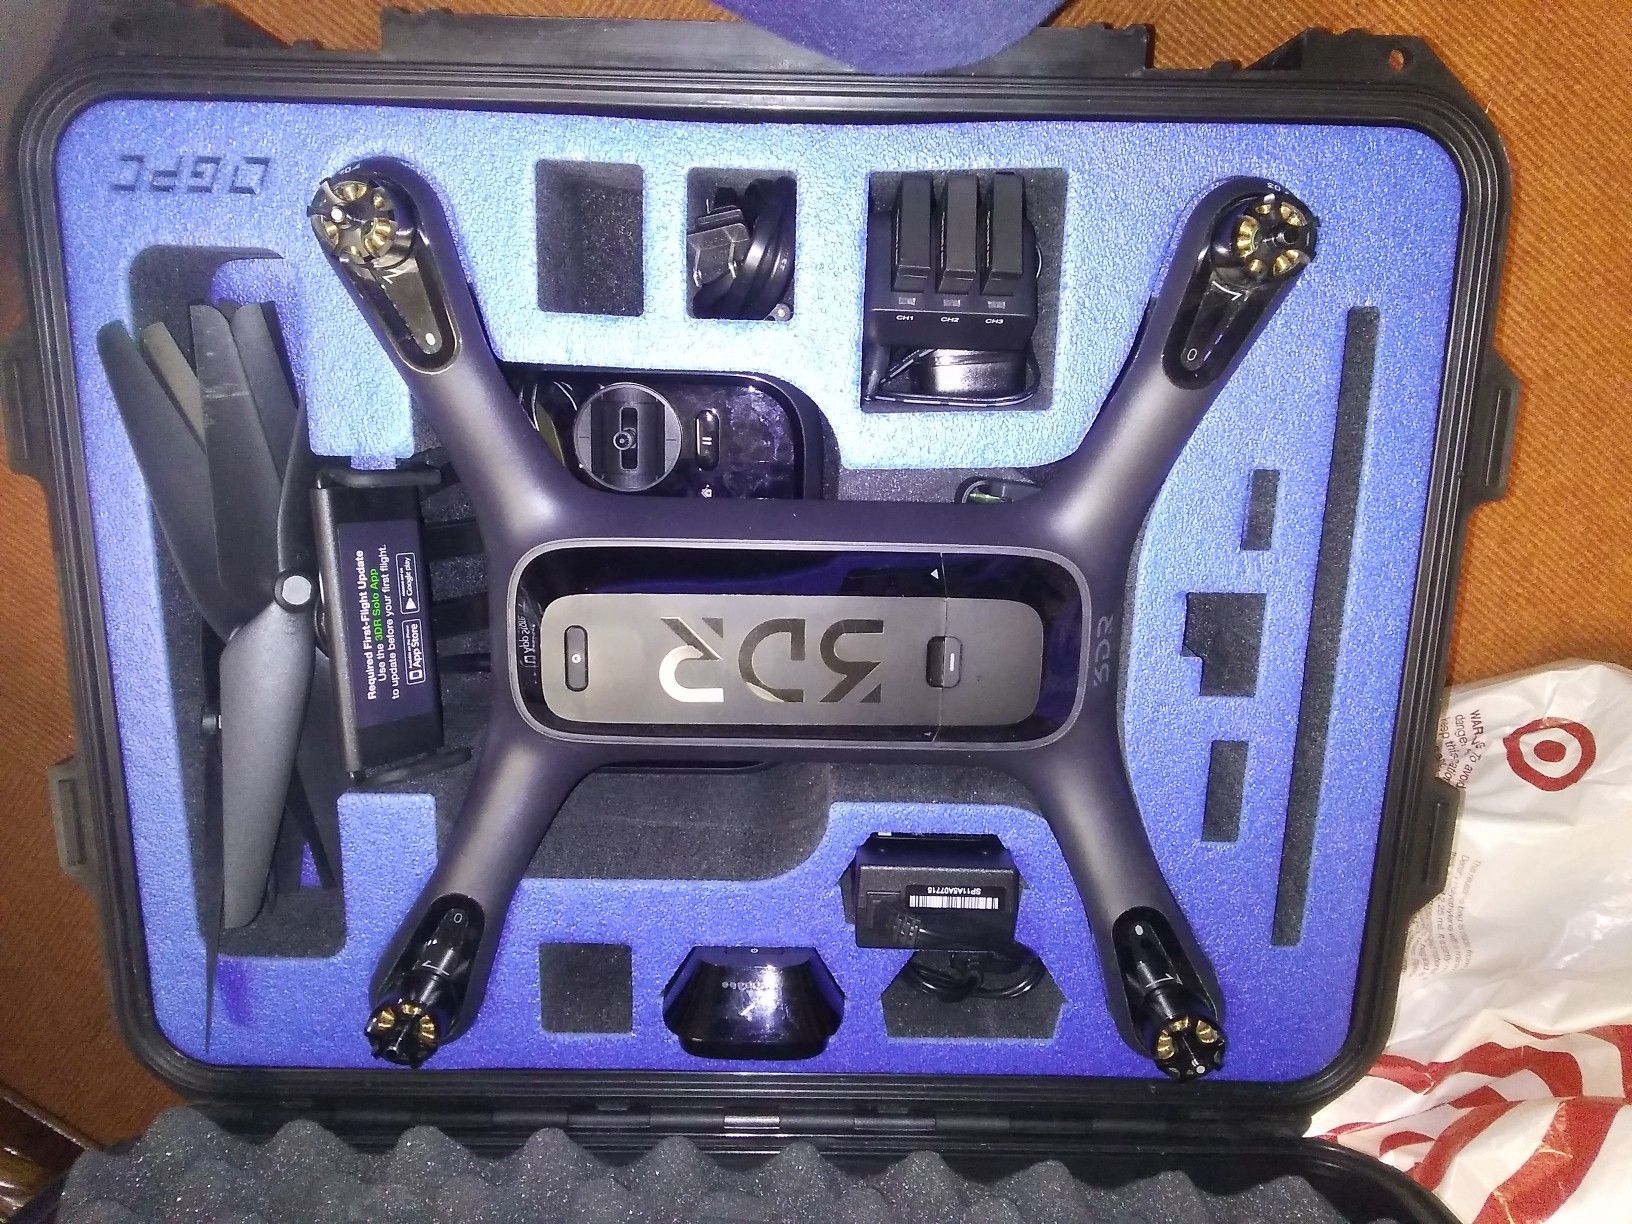 3dr Solo w/ Gopro Hero 3, and Gimbal. Plus Case and Extra Battery